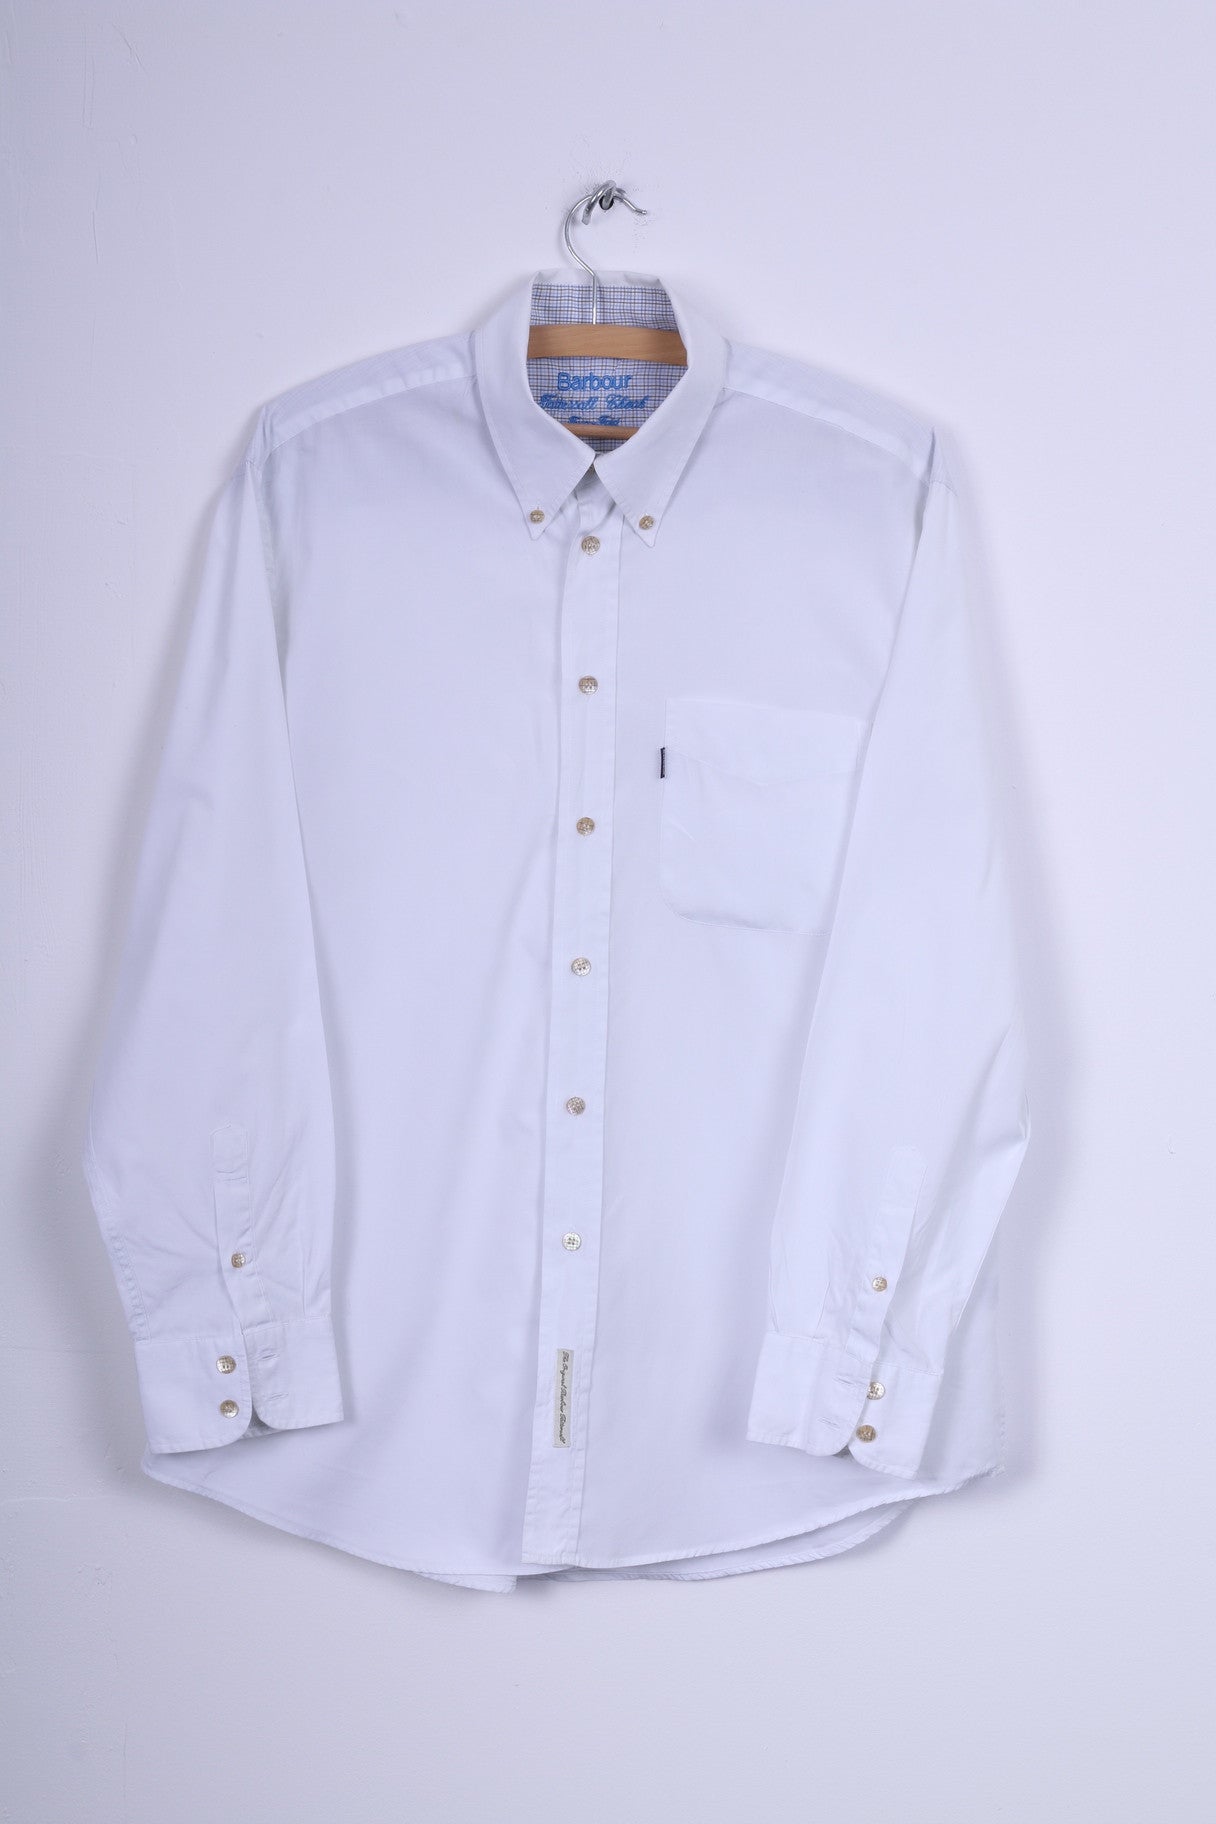 Barbour Mens 41/42 L Casual Shirt White Two Fold Cotton Long Sleeve